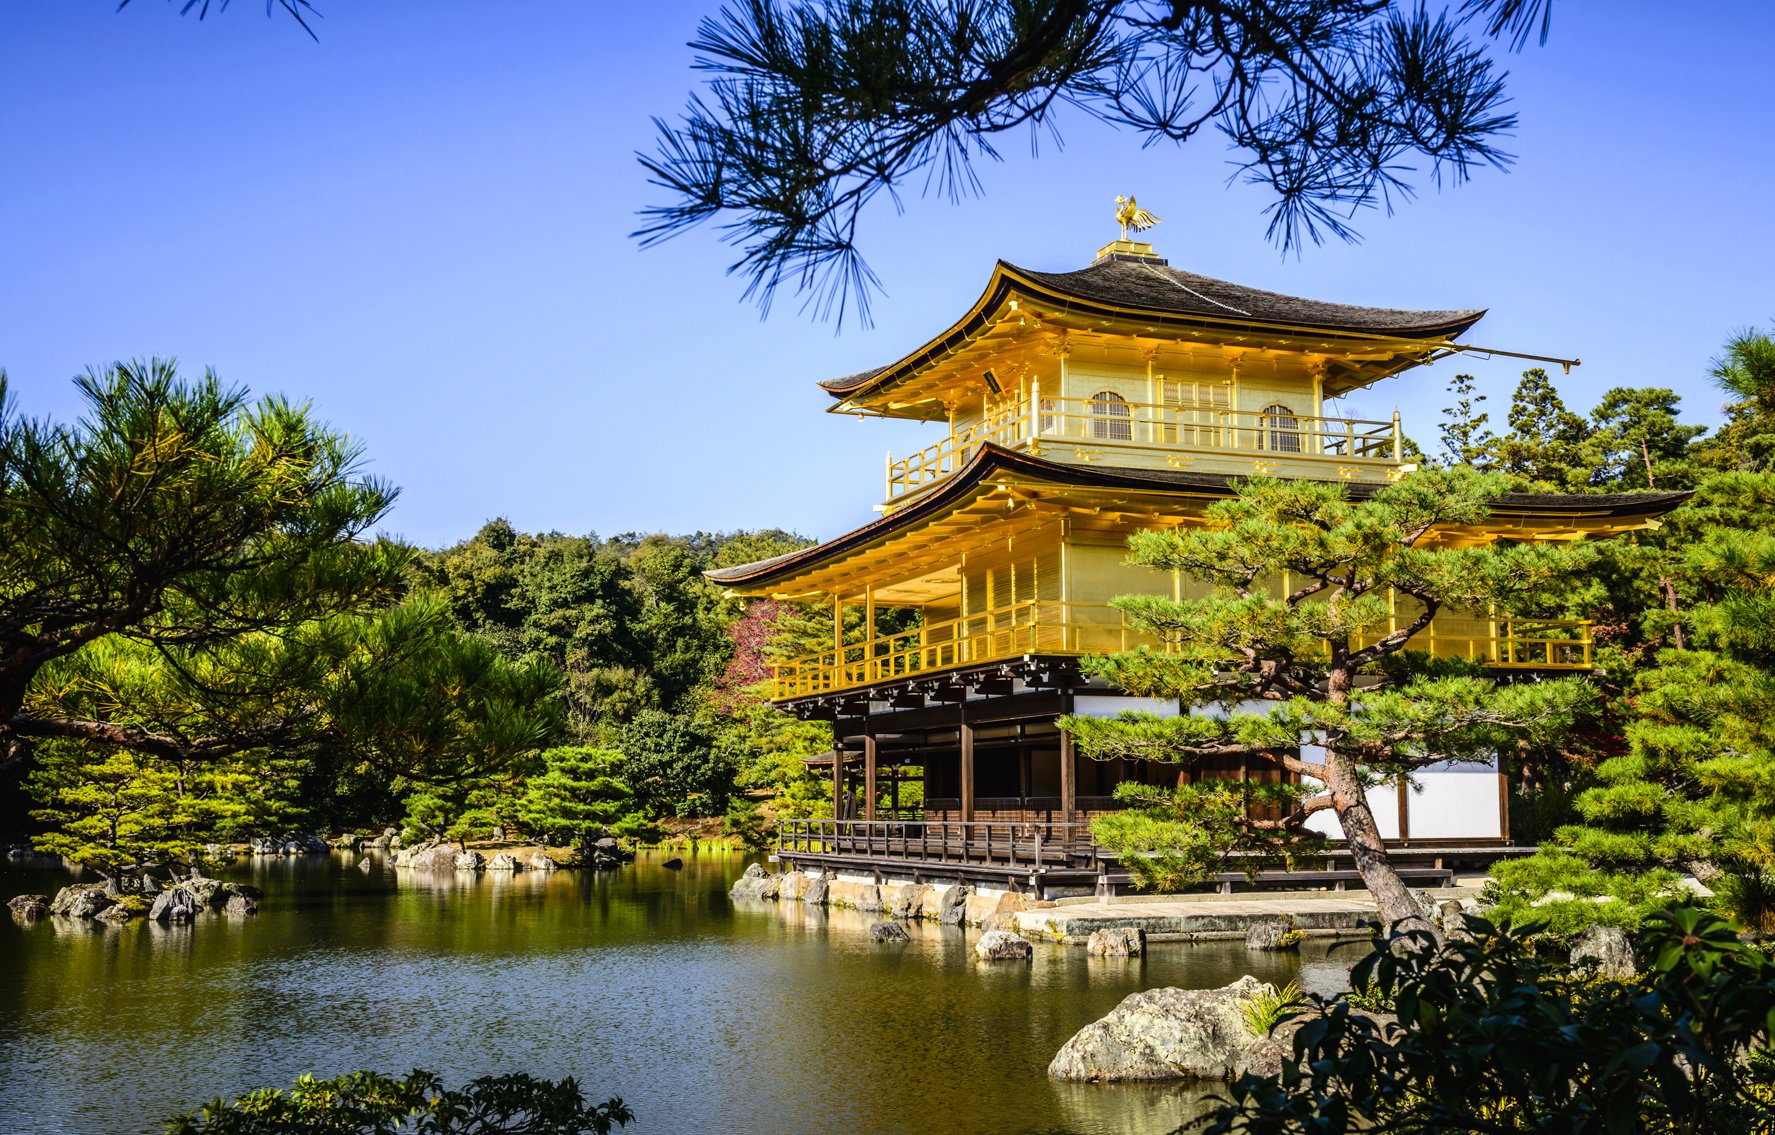 Gold Temple over still lake, Kyoto, Japan